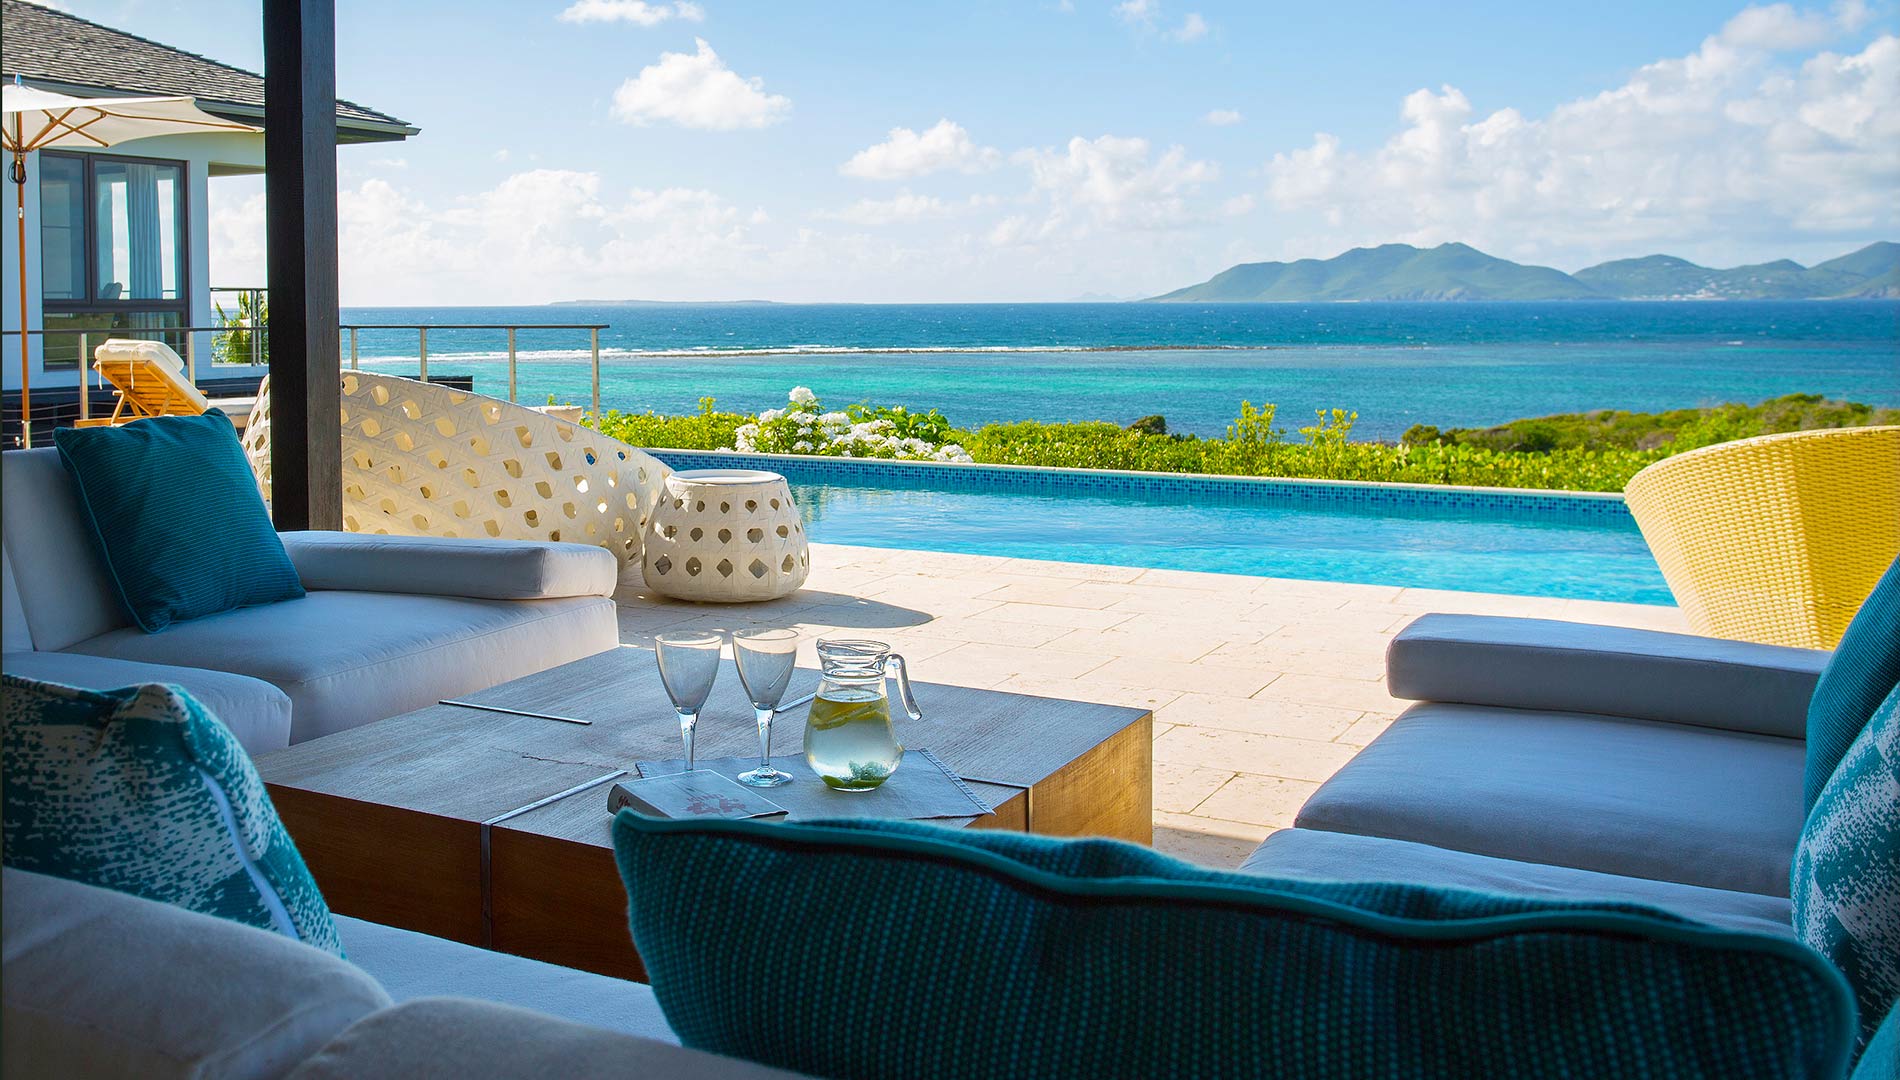 Welcome to Anani, a luxury villa overlooking the shimmering Caribbean Sea on the island of Anguilla.